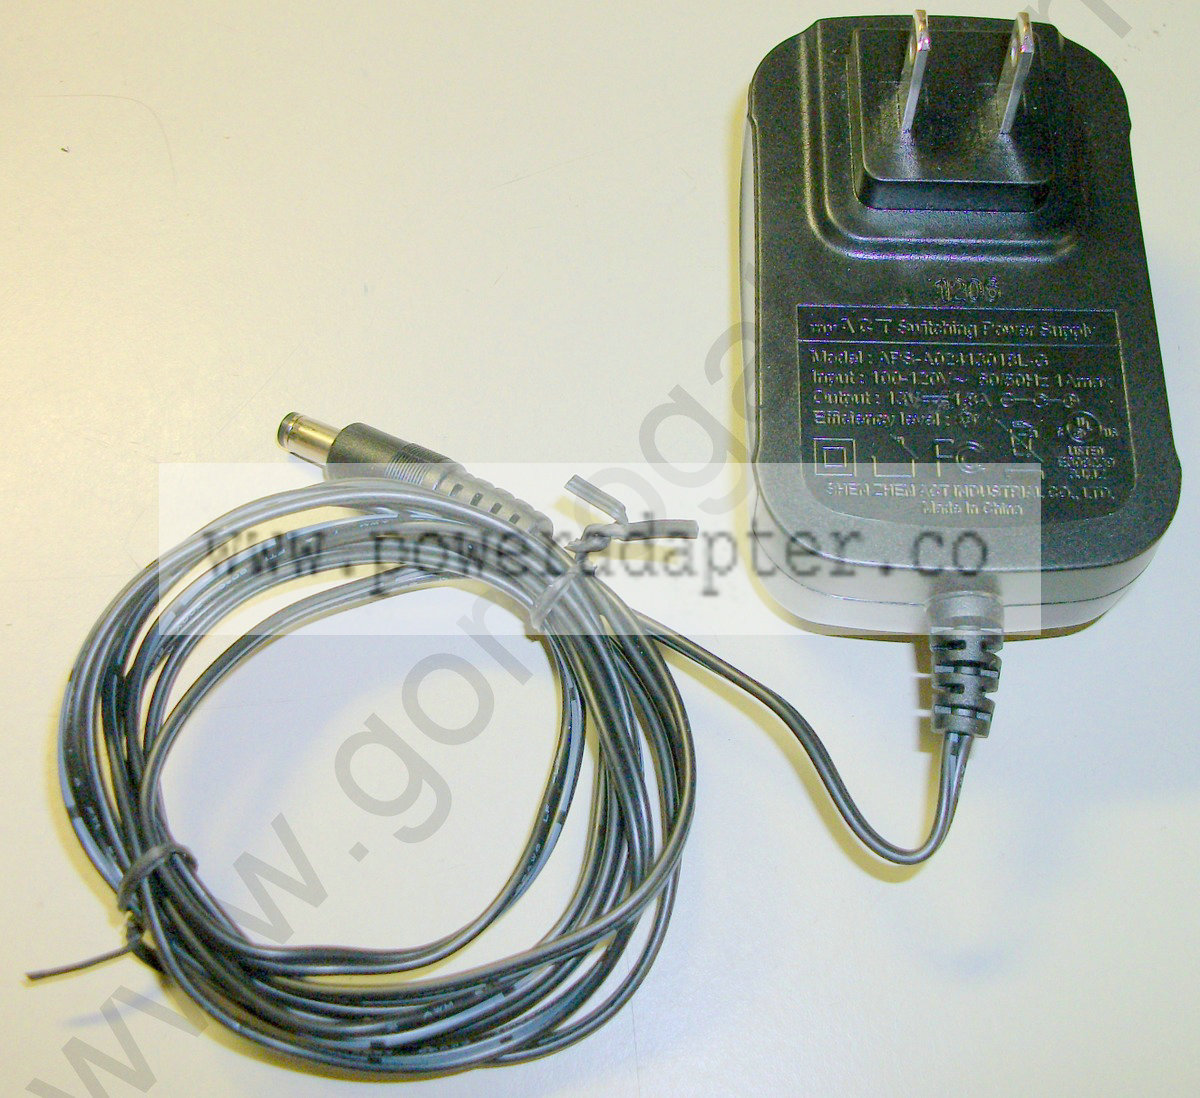 MyACT Switching Power Supply 13V DC - AC Adapter [APS-A1241301] Input: 100-120VAC 50/60Hz 1A max Output: 13VDC 1.8A Mo